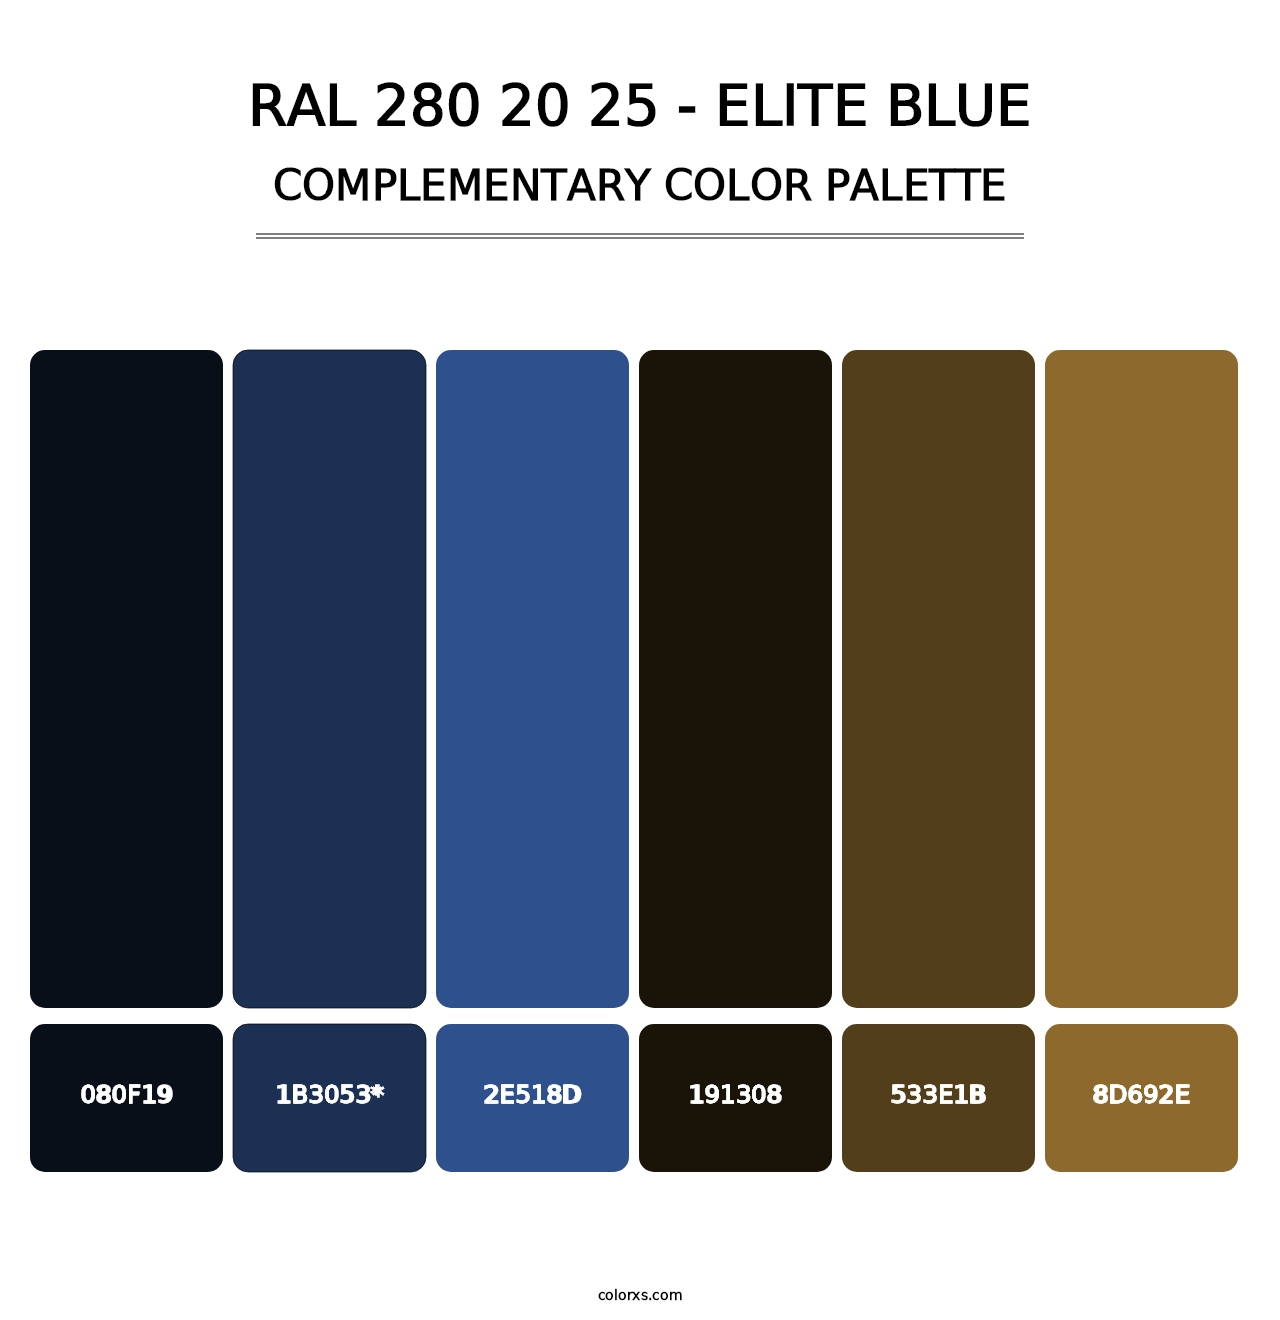 RAL 280 20 25 - Elite Blue - Complementary Color Palette